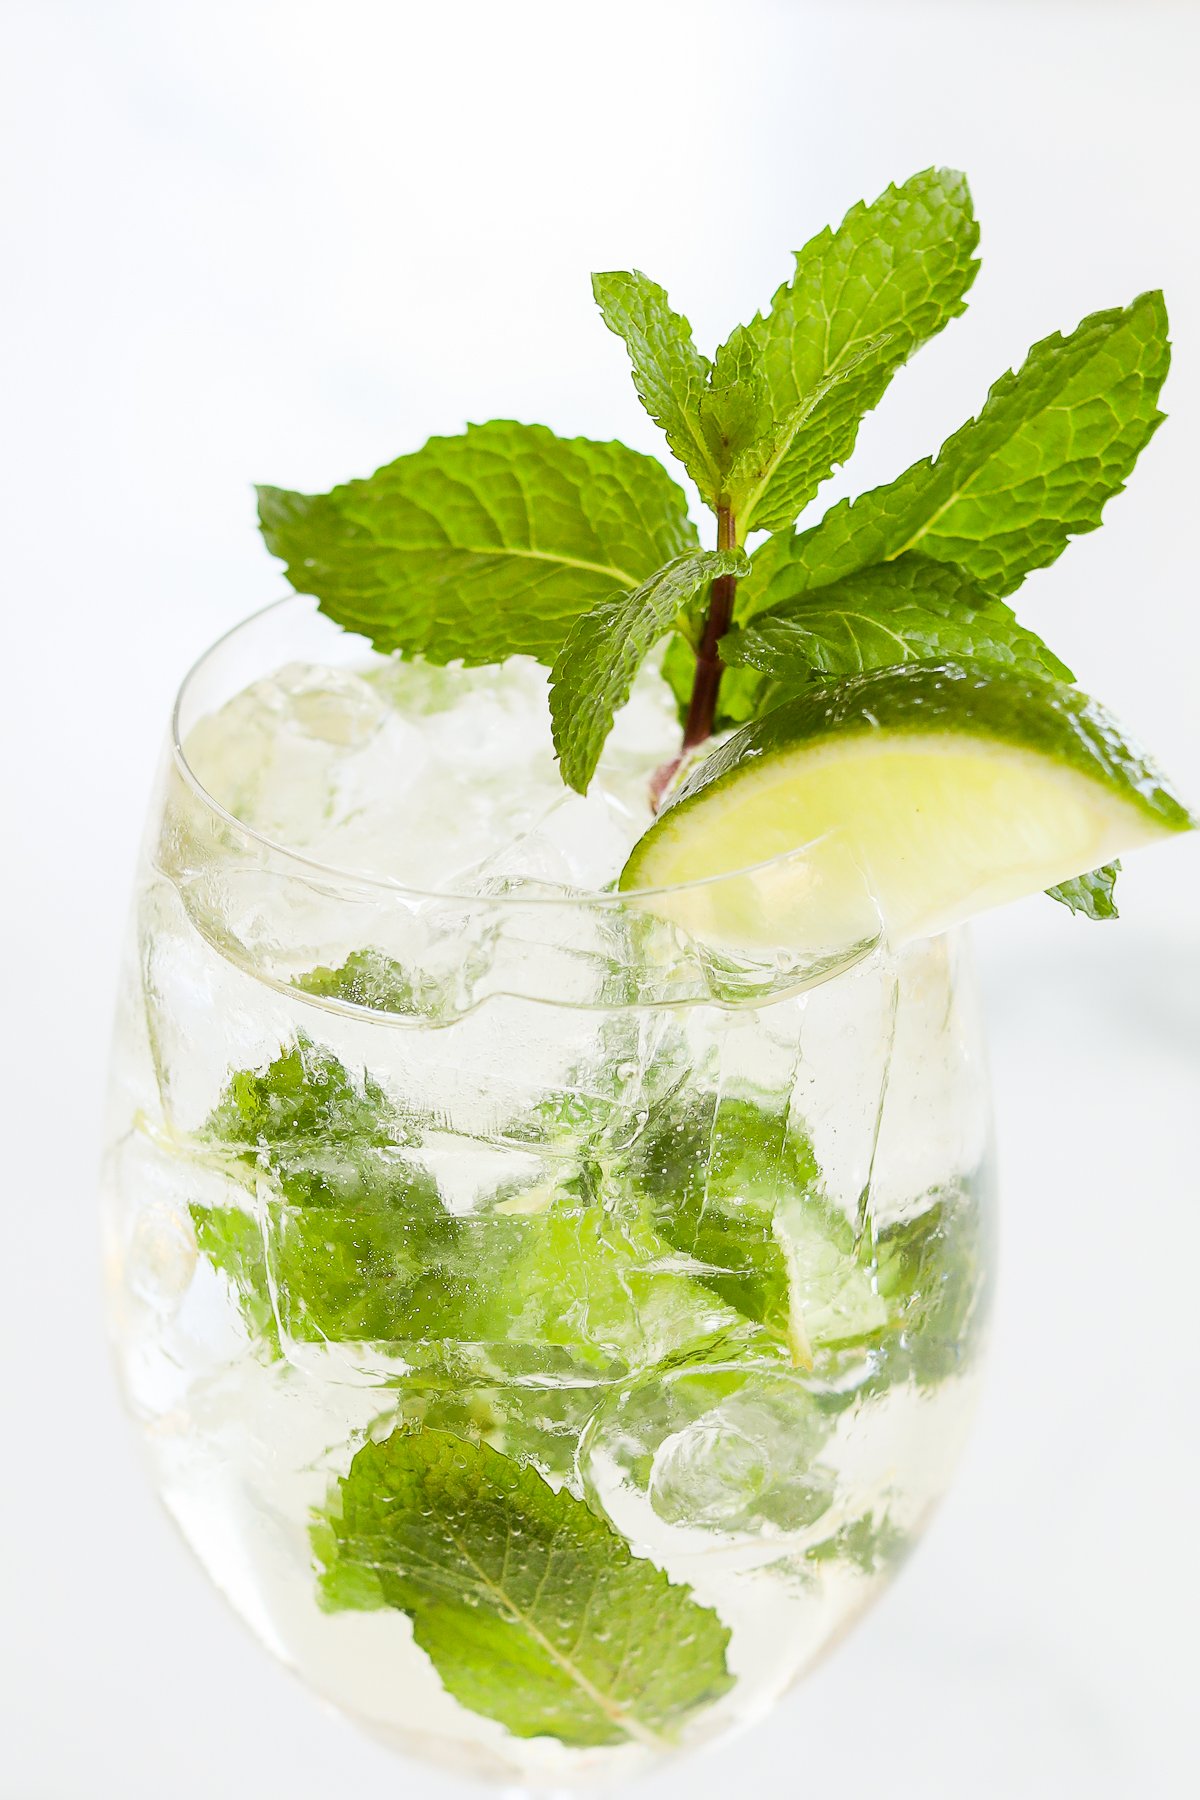 A glass of Hugo spritz garnished with fresh mint leaves and a slice of lime.